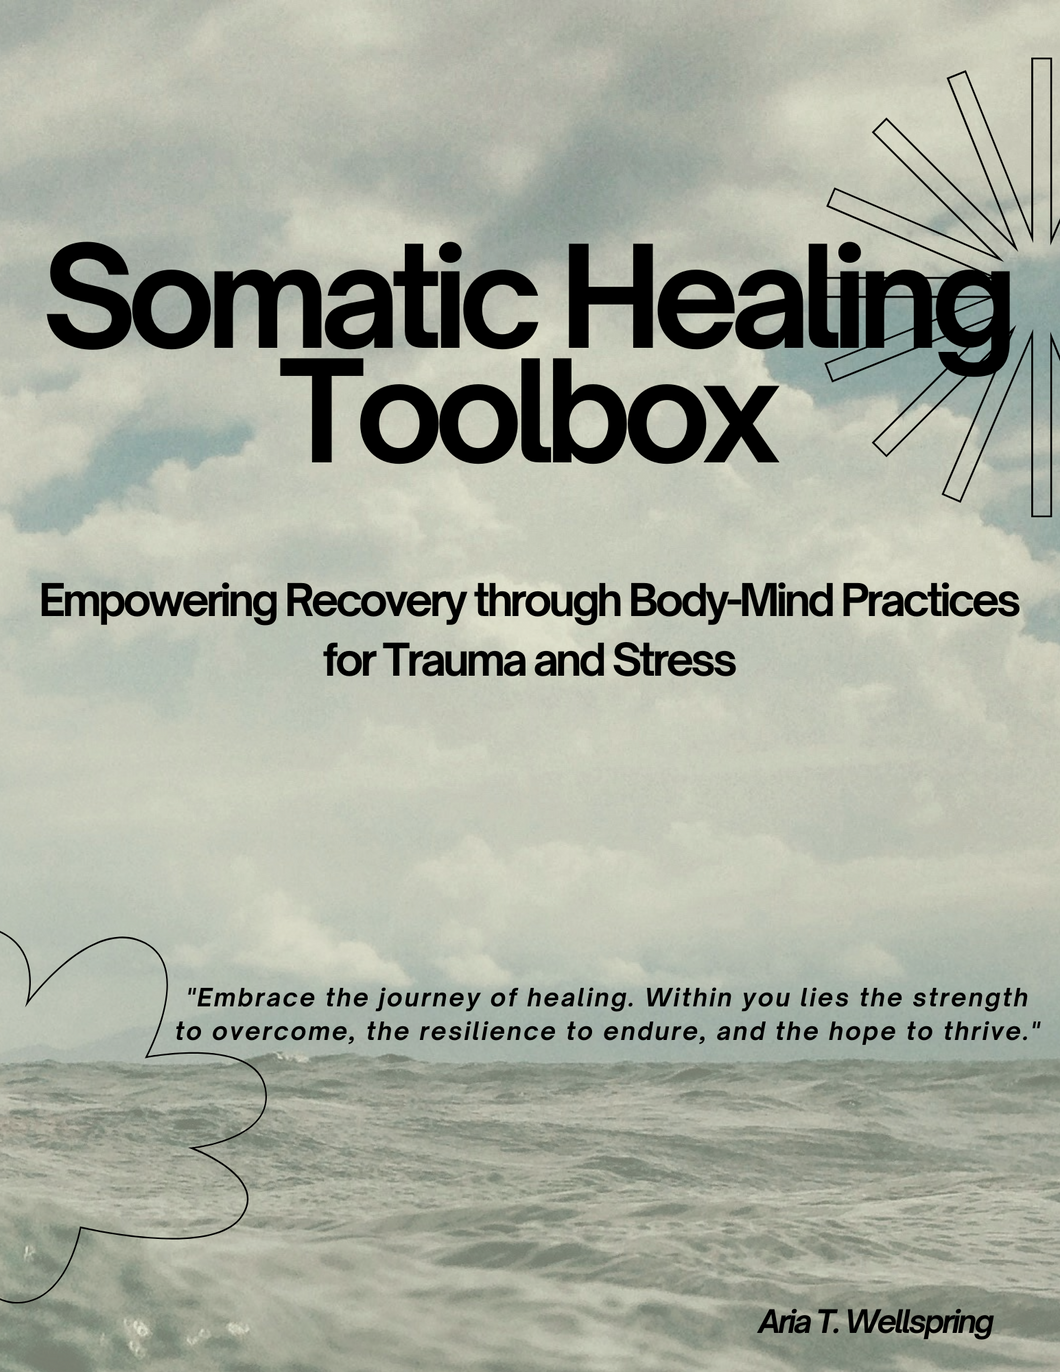 Somatic Healing Toolbox: Harnessing Body-Mind Practices for Trauma Recovery and Stress Relief